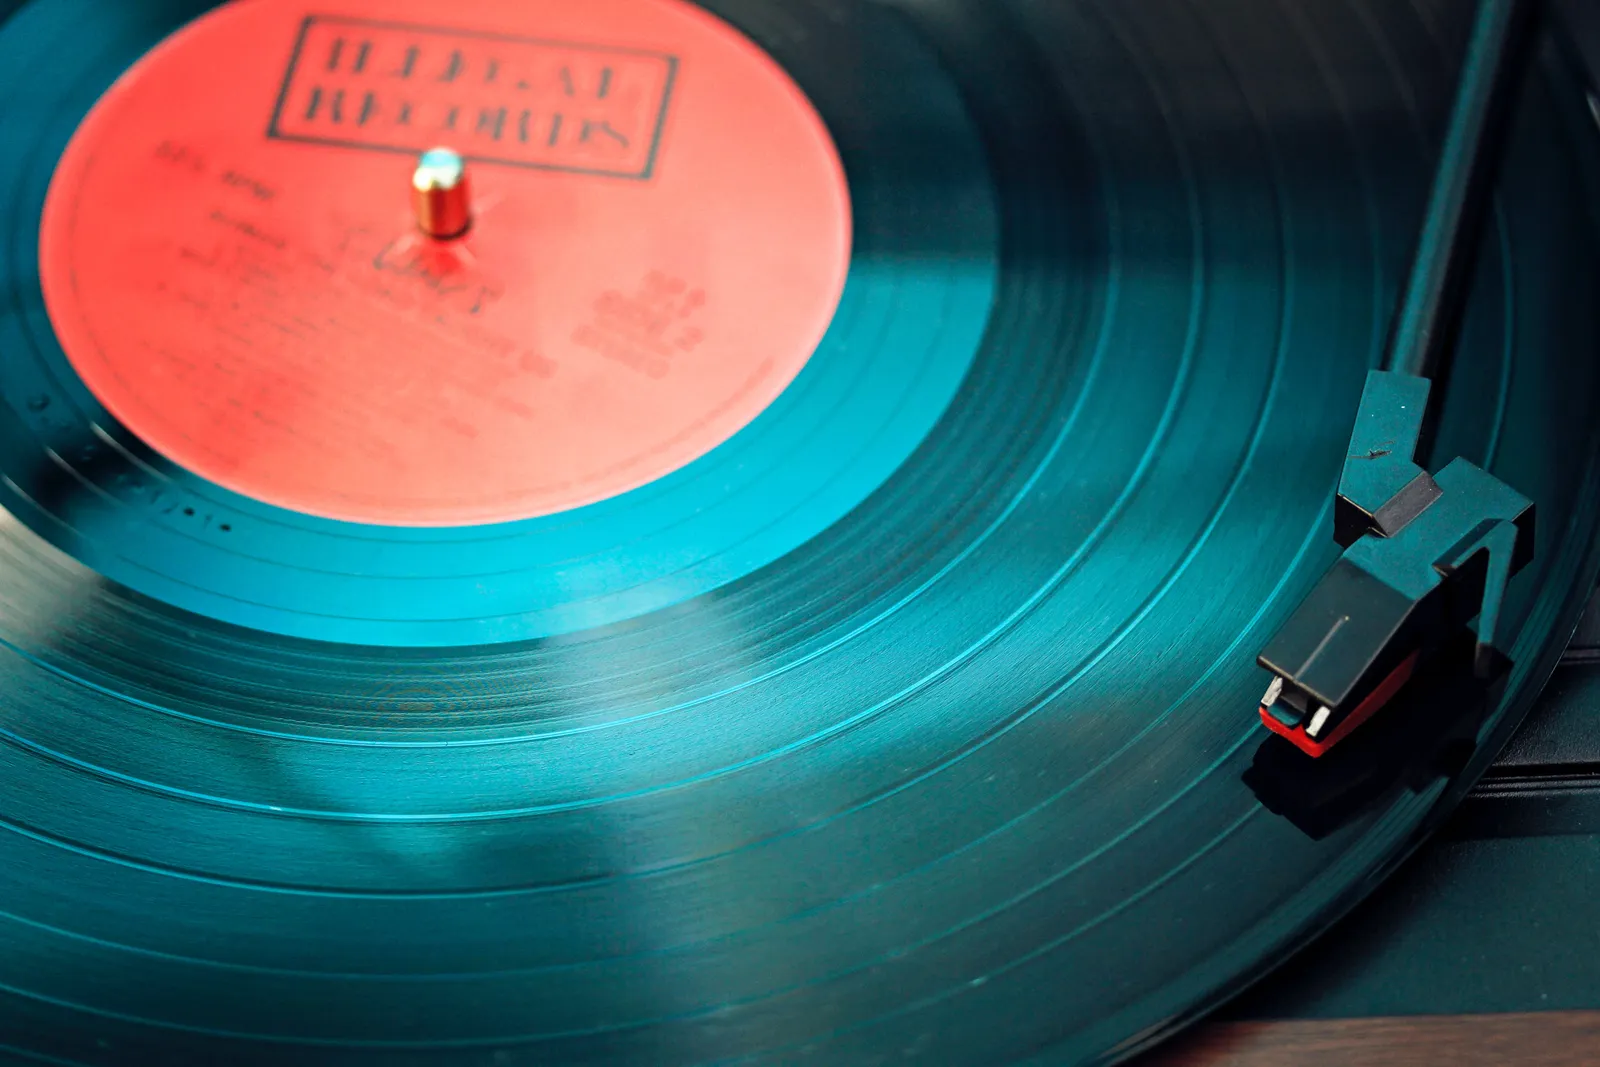 Vinyl Records Outsell CDs for First Time Since 1987